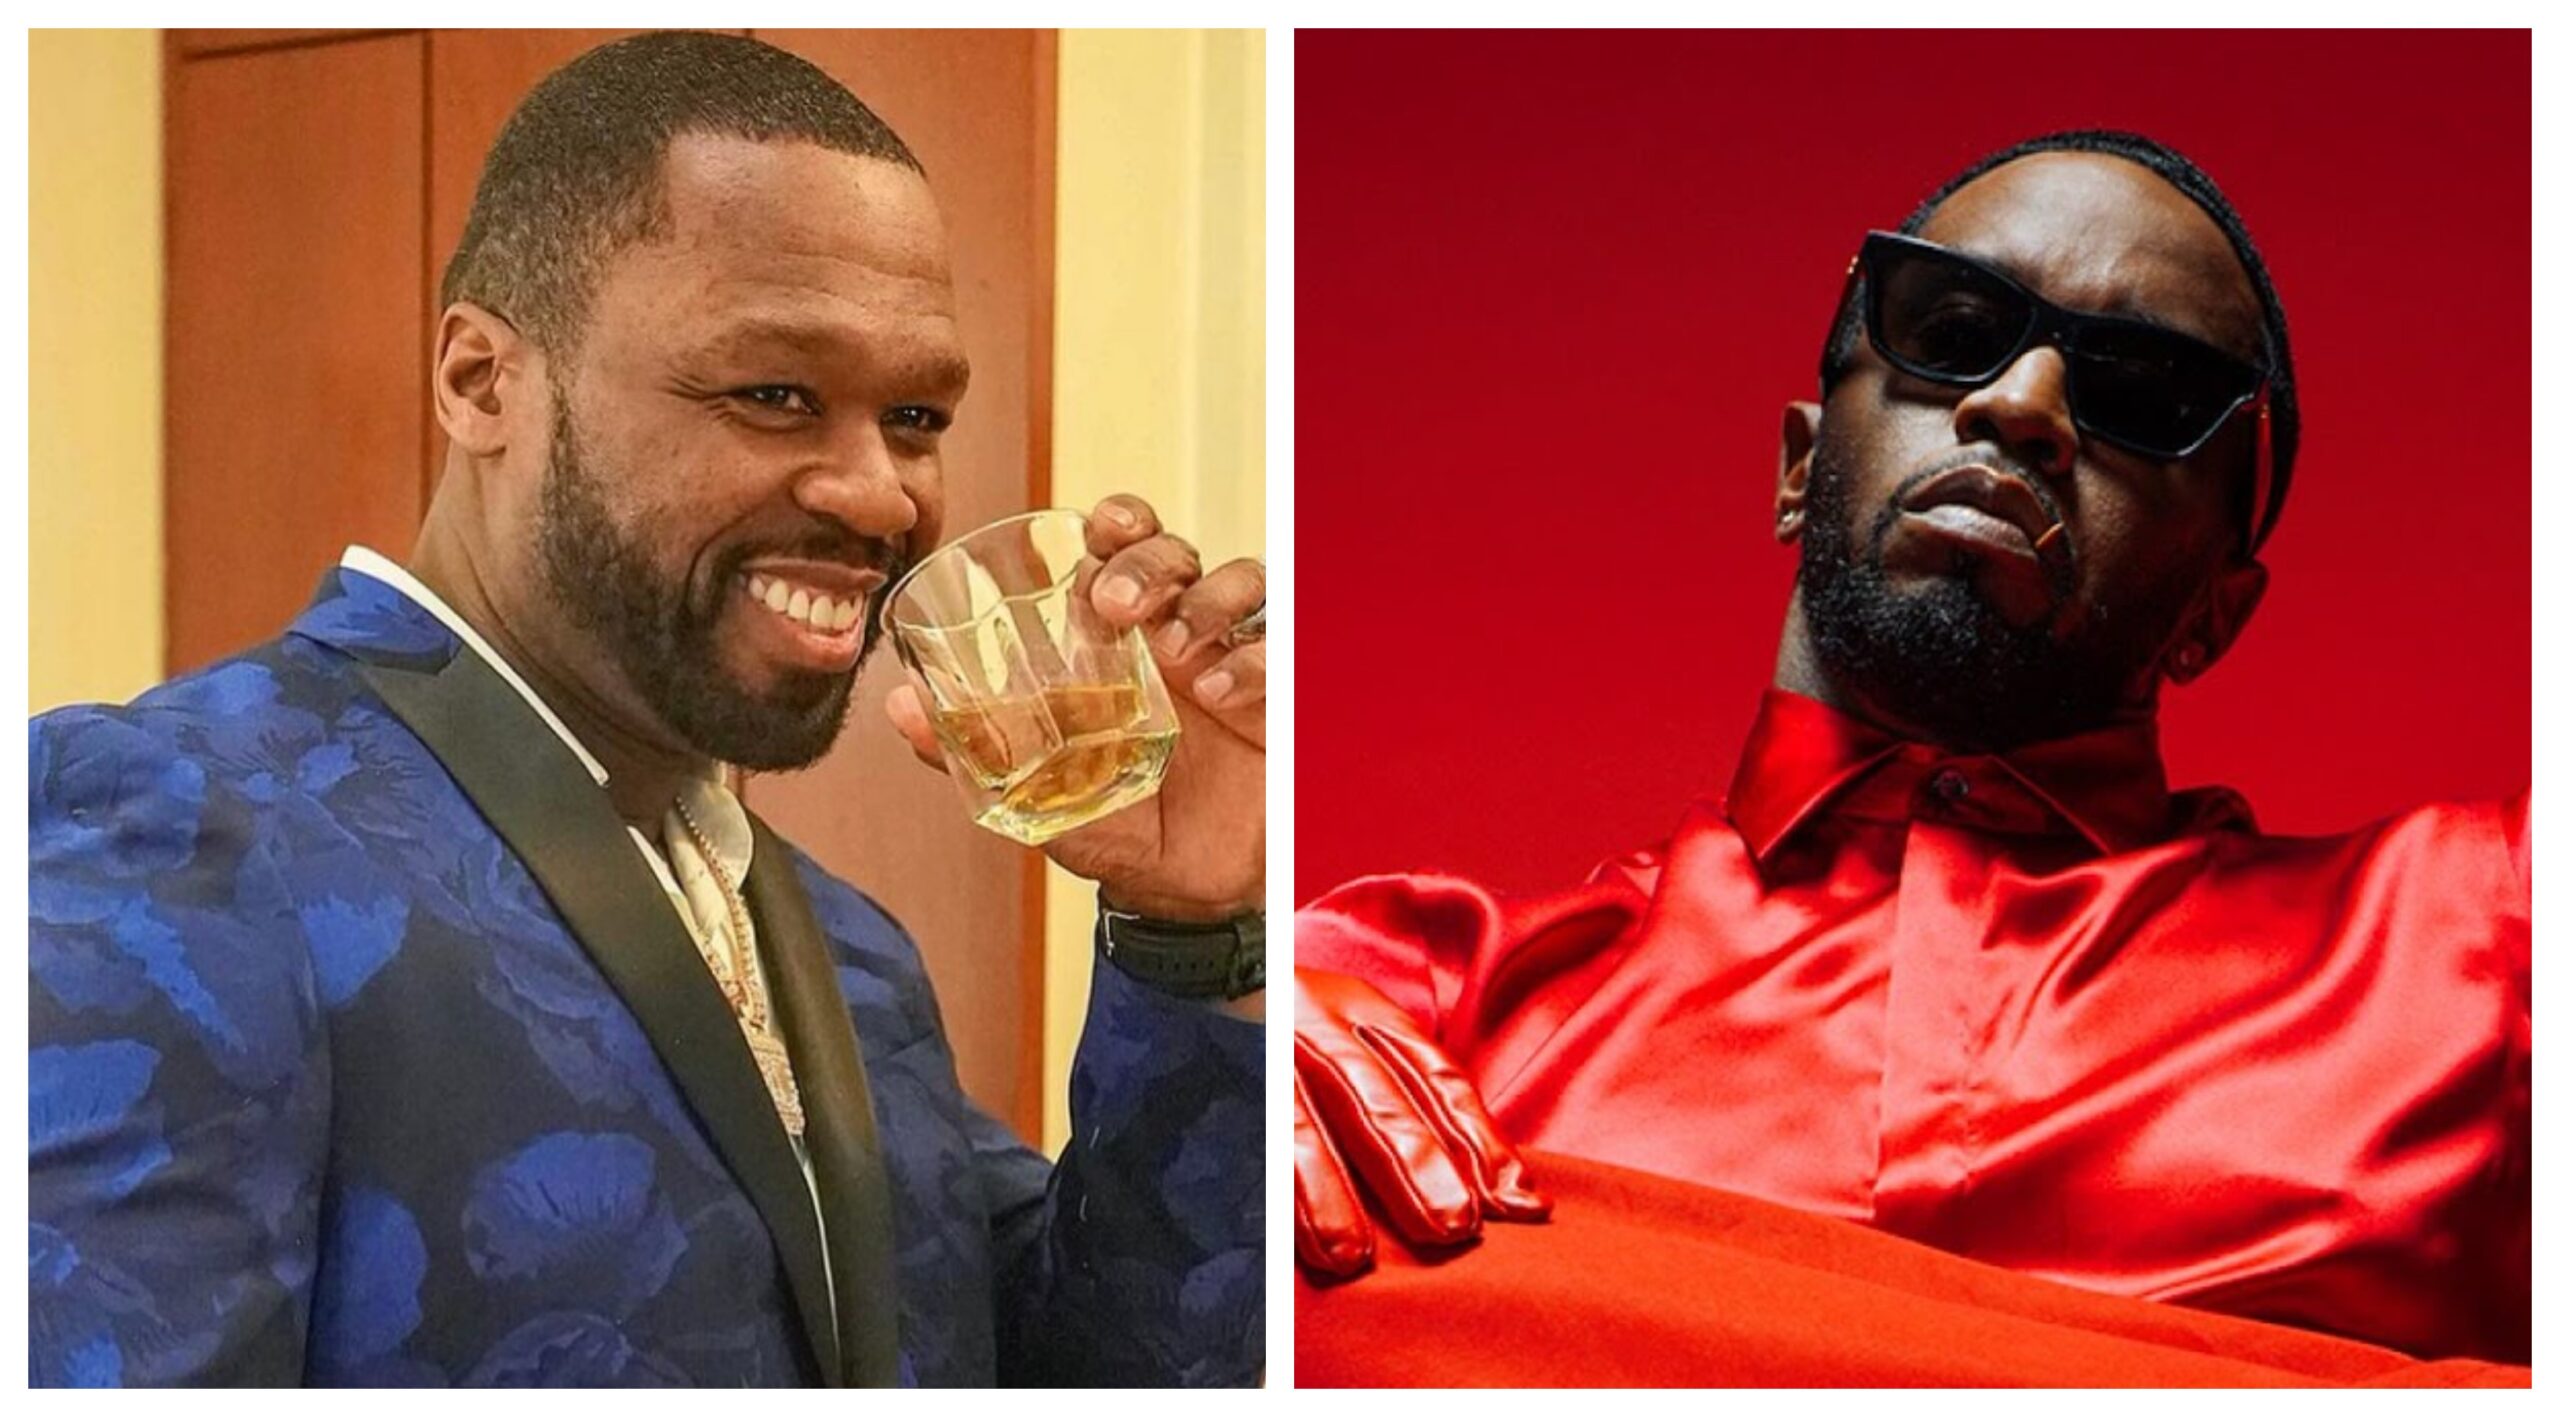 50 Cent Trolls Diddy’s Claims of Innocence After Cassie Attack Video: “Lie Detector Has Determined This Was a Lie”